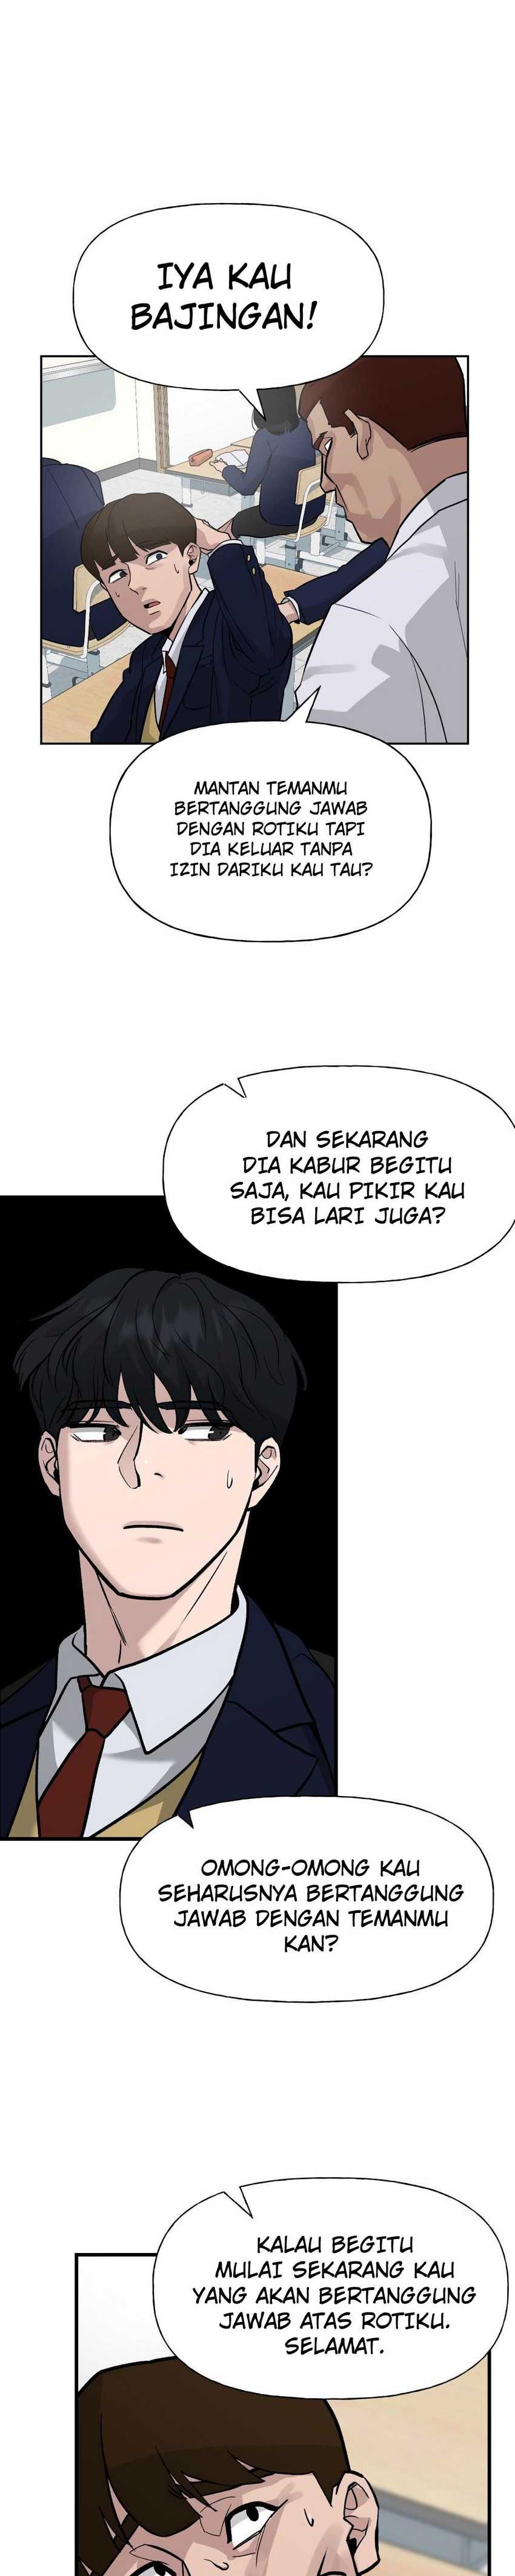 The Bully In Charge Chapter 02